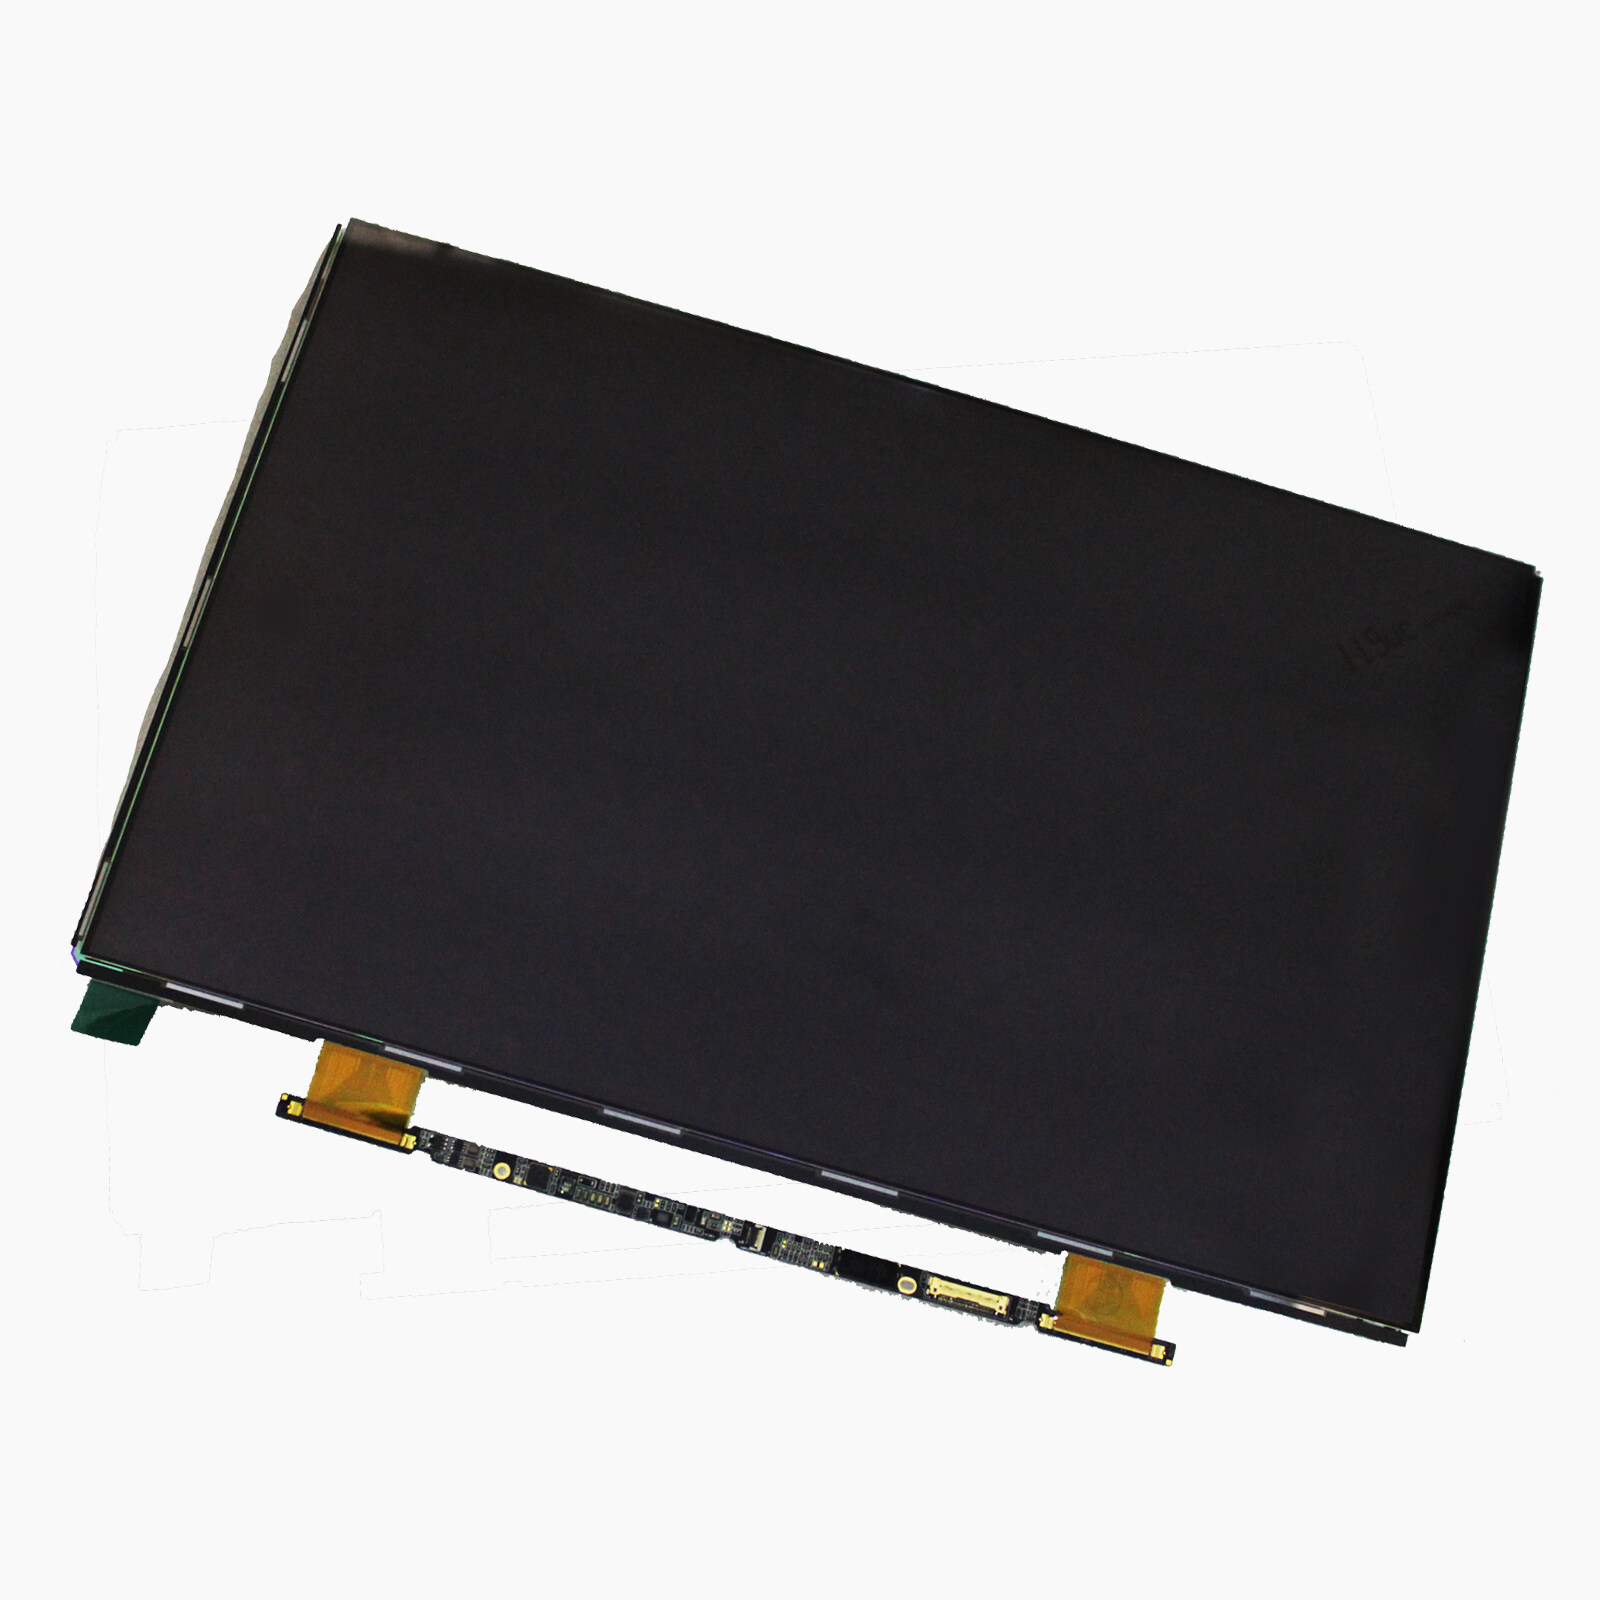 Kreplacement FOR MACBOOK AIR 13" A1369 A1466 SCREEN LED LCD panel display LSN133BT01-A01 LTH133BT01 LP133WP1 TJA1 A3